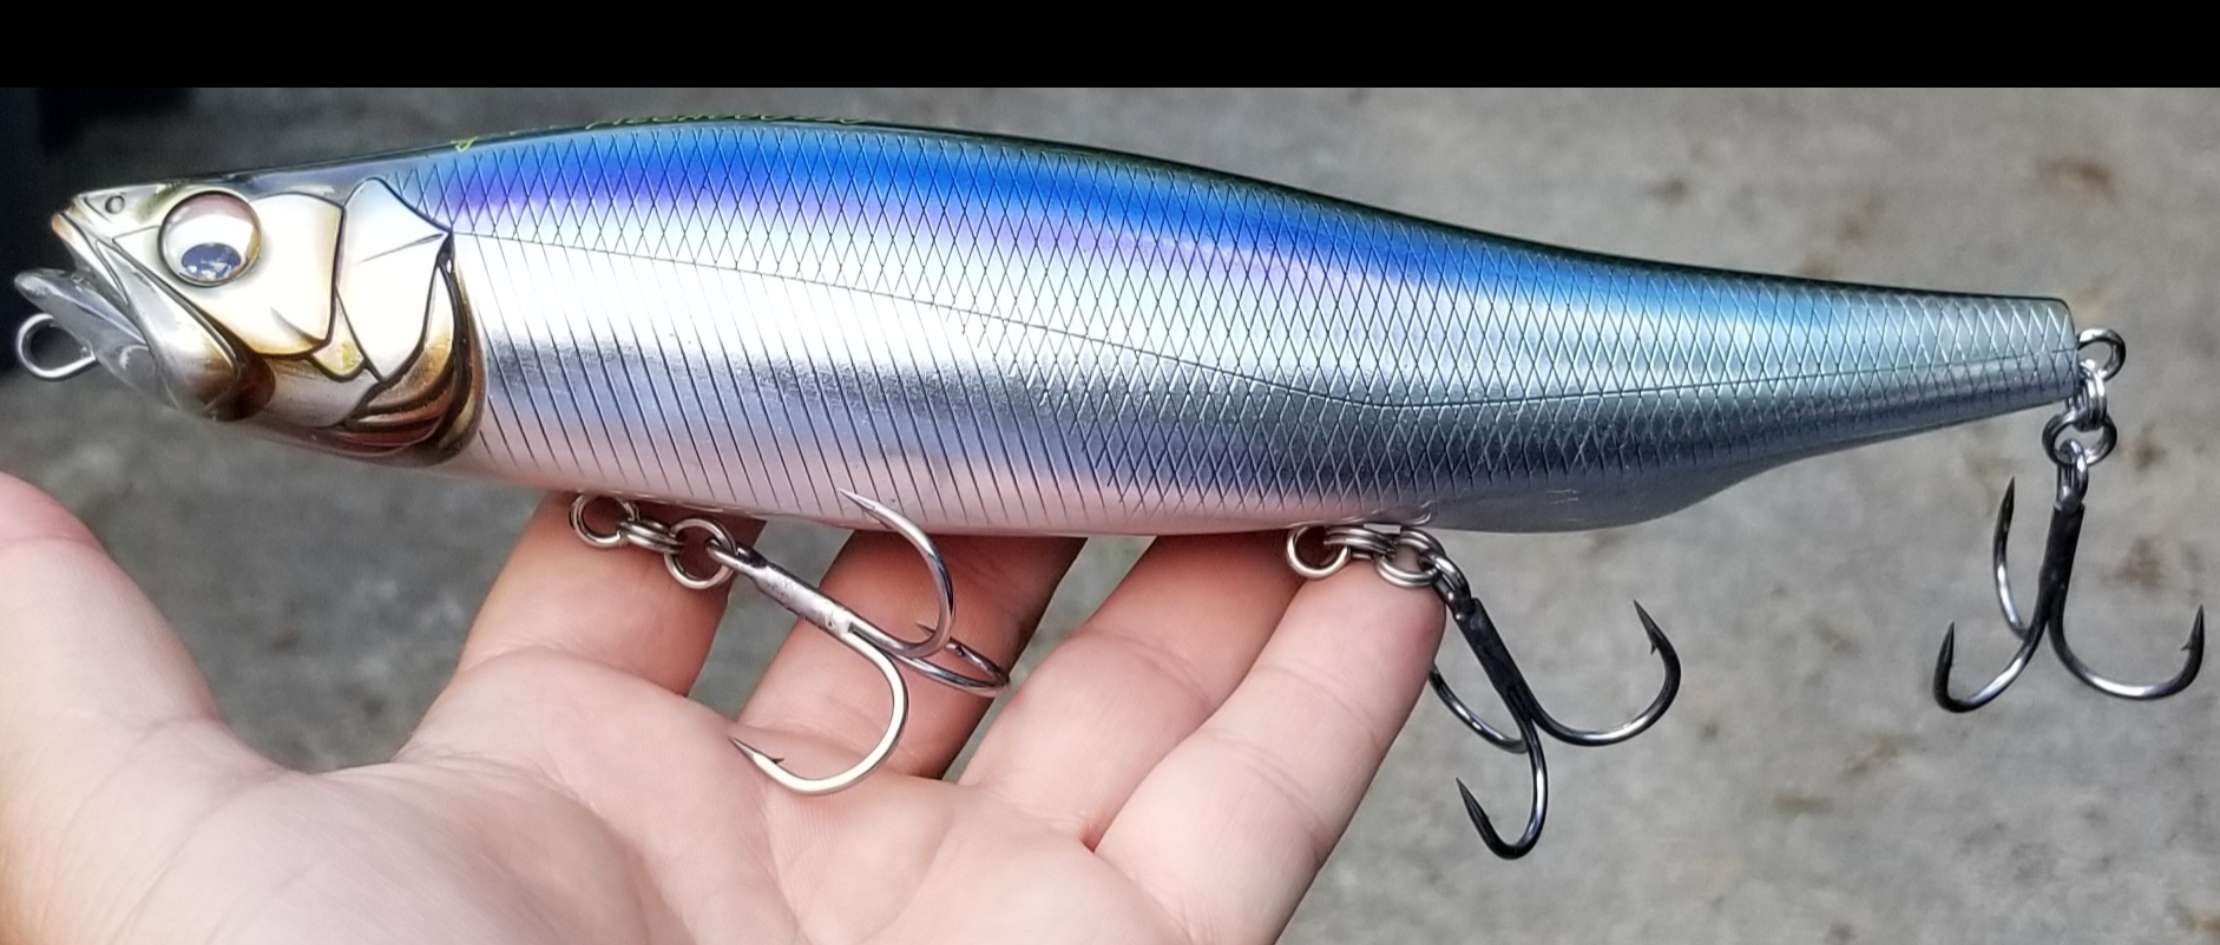 Your Favorite Megabass Lure Besides. - Fishing Tackle - Bass